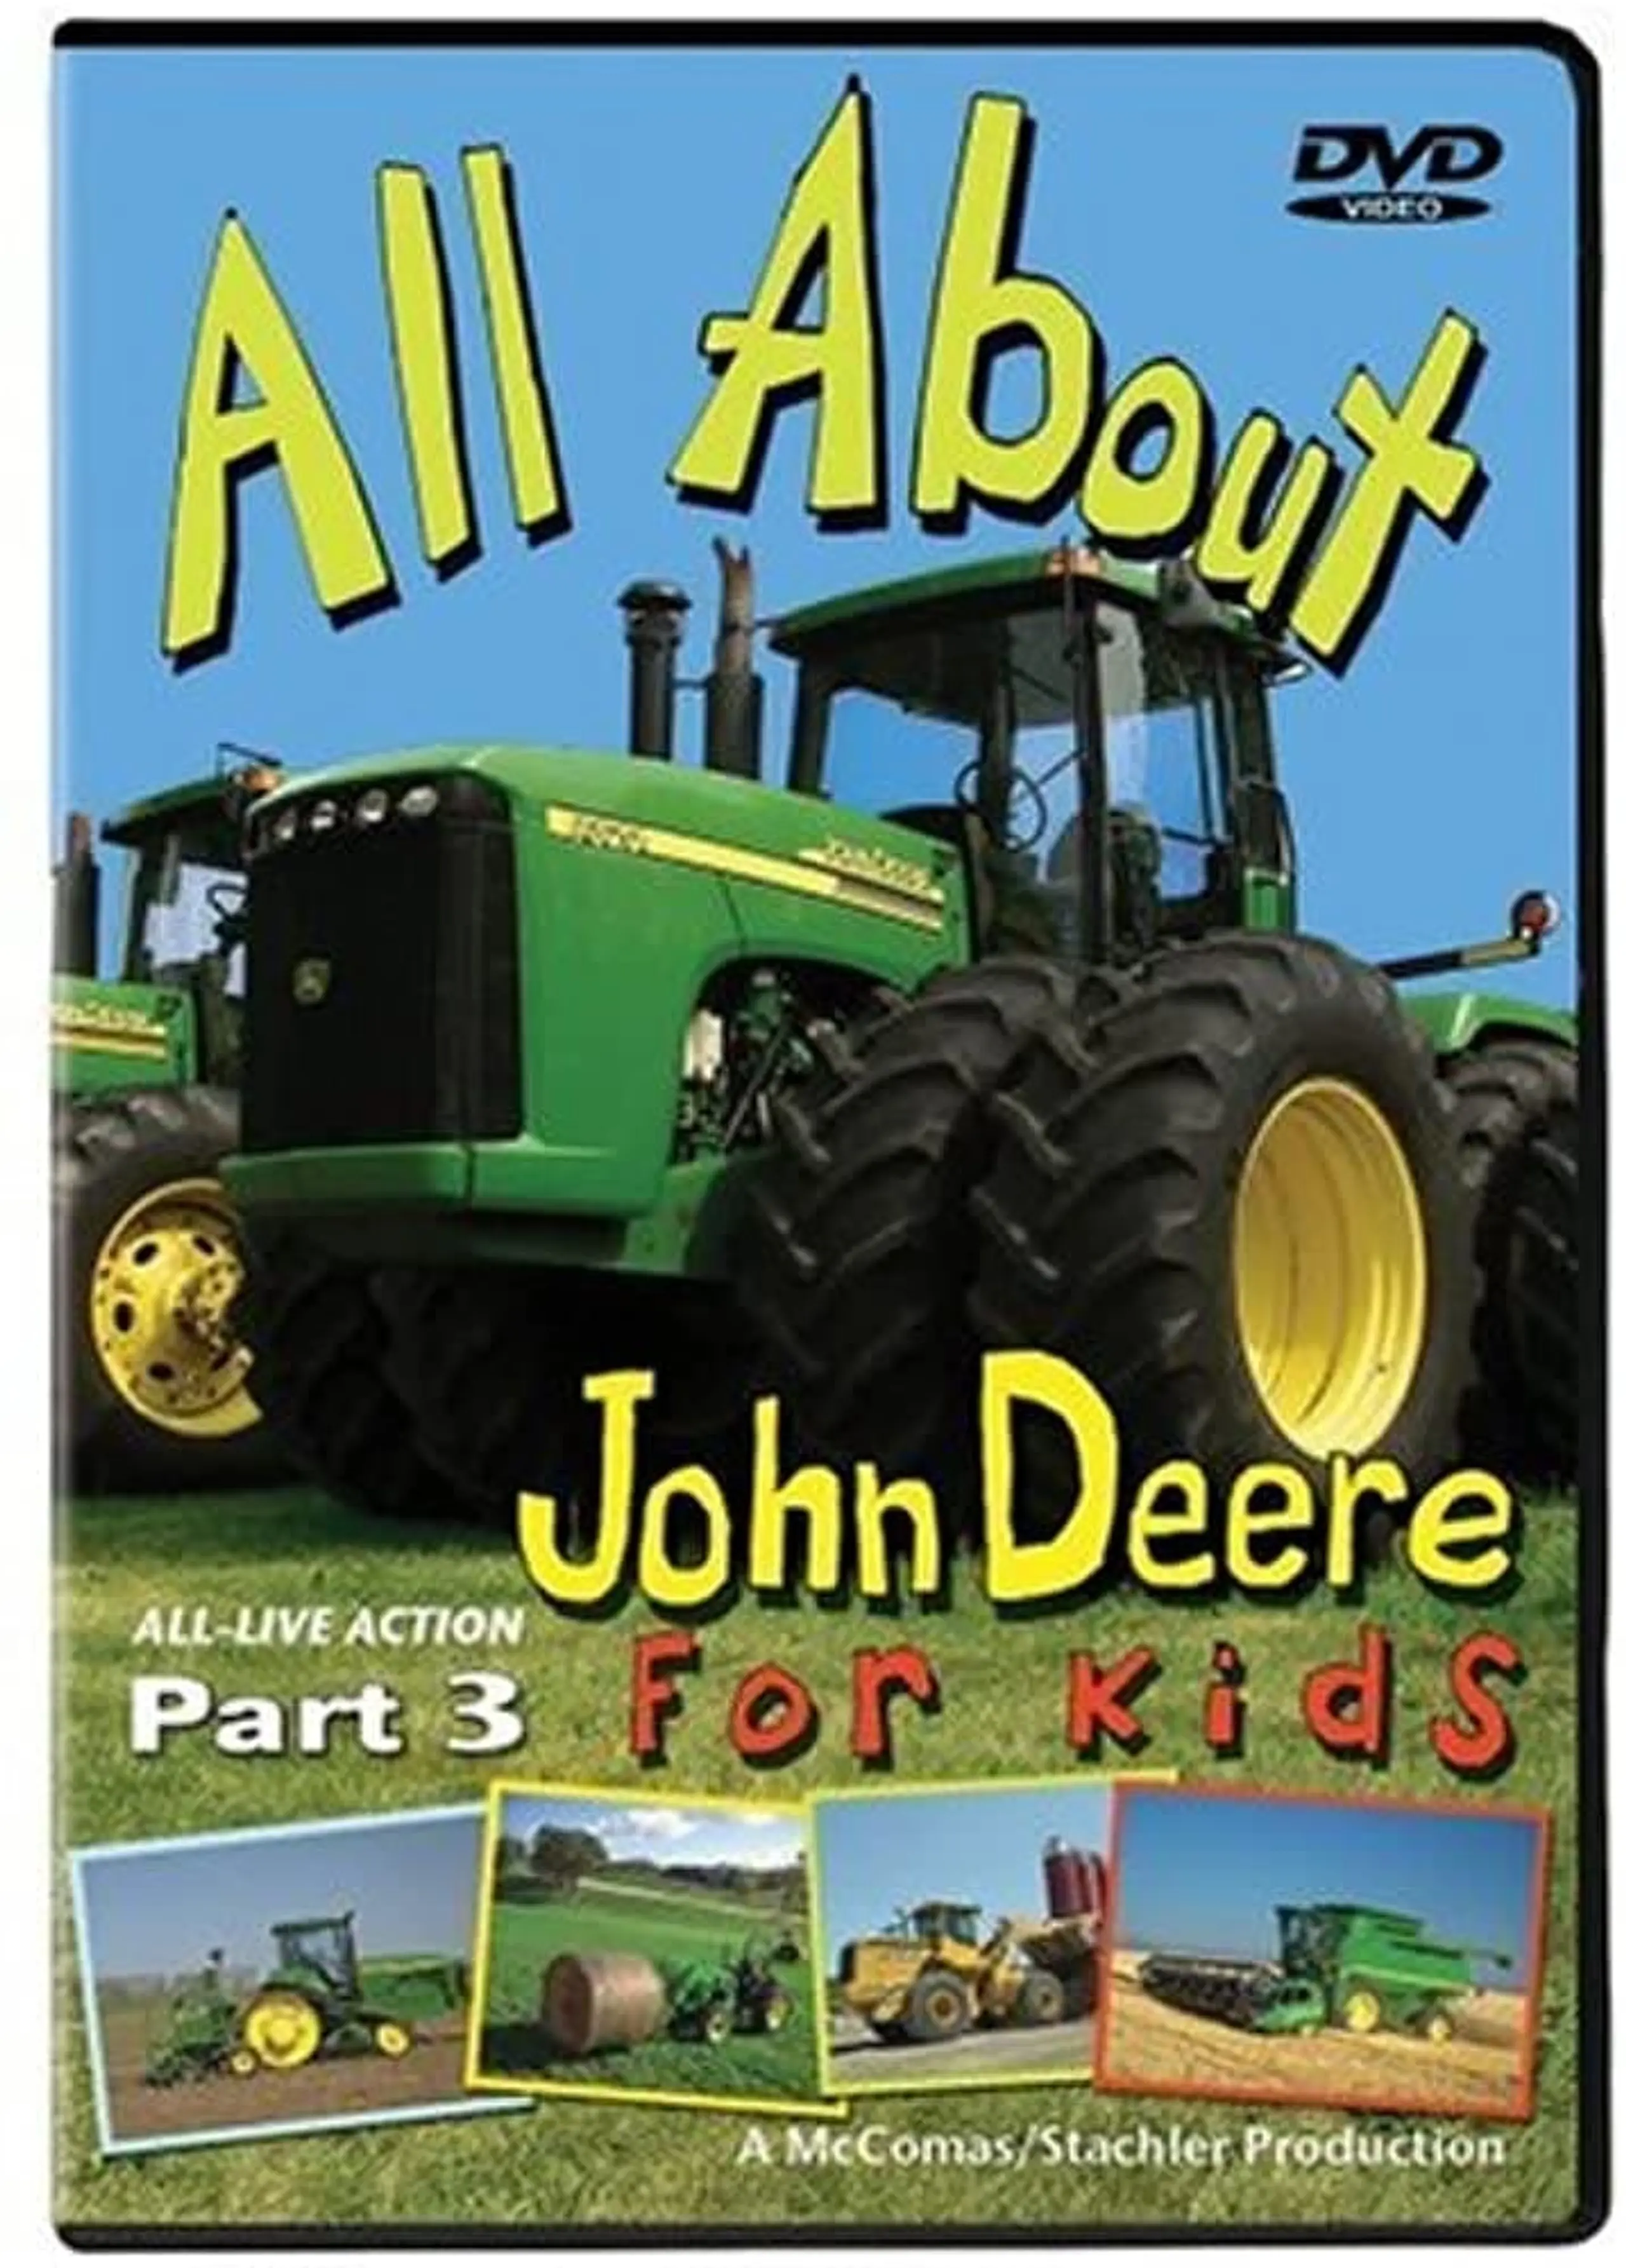 All About John Deere for Kids, Part 3